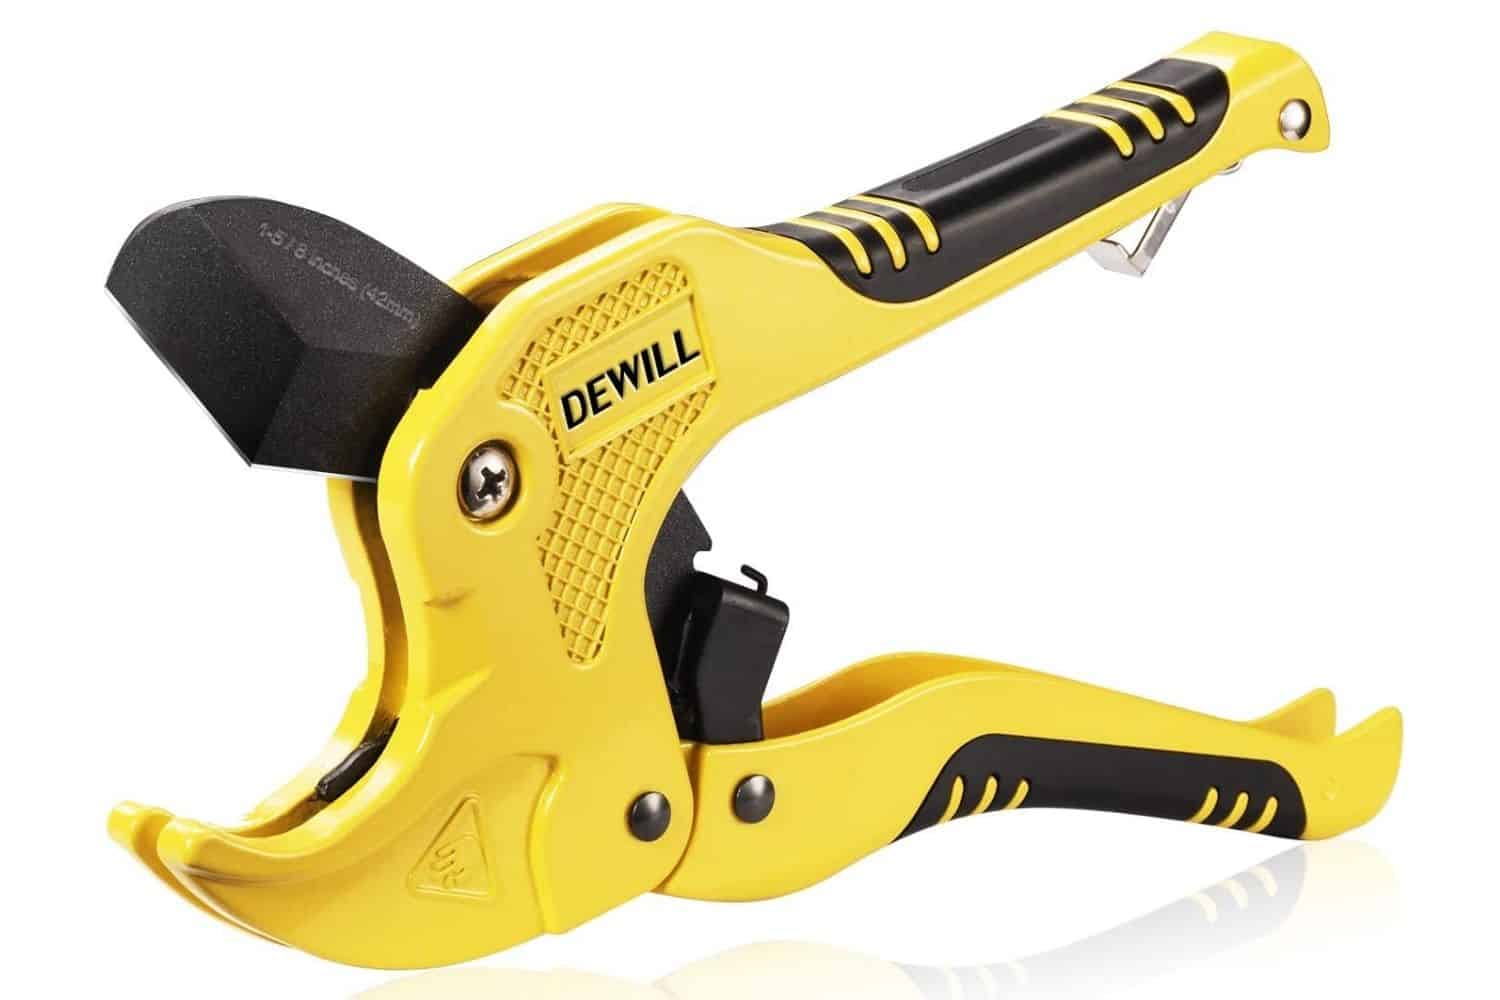 DEWILL Ratchet-type PVC Cutter Review